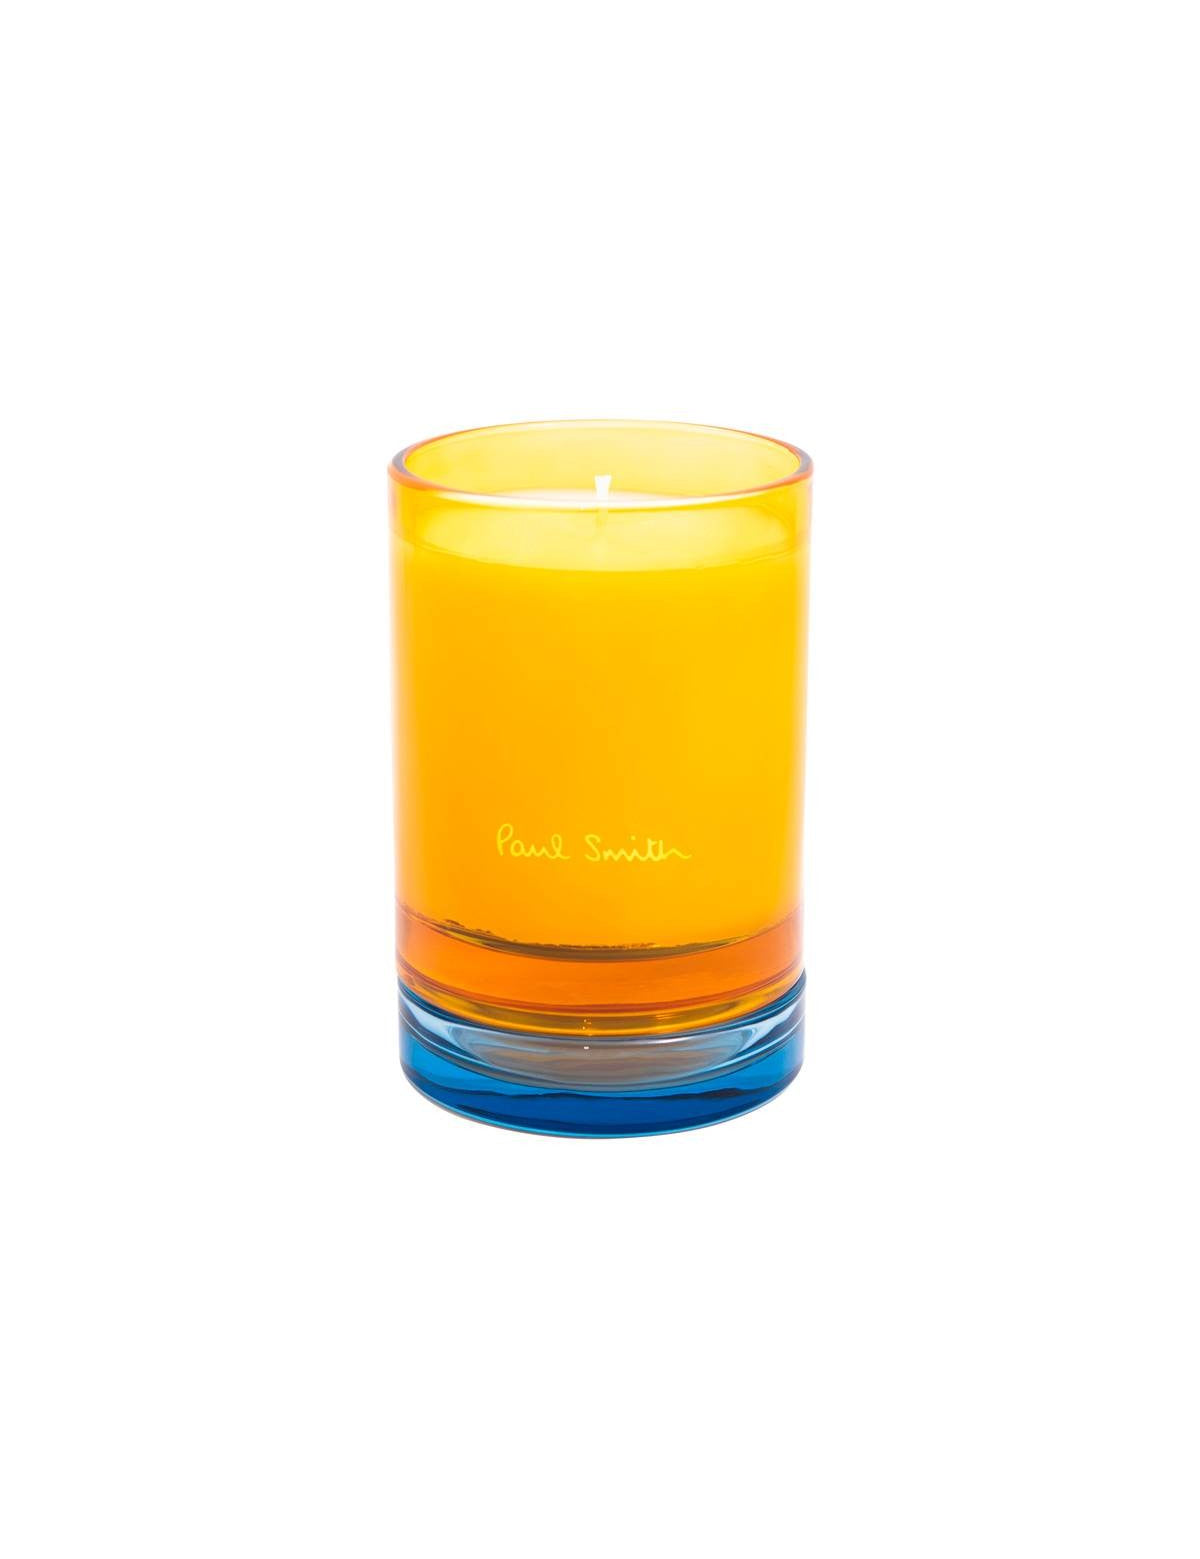 paul-smith-daydreamer-scented-candle.jpg